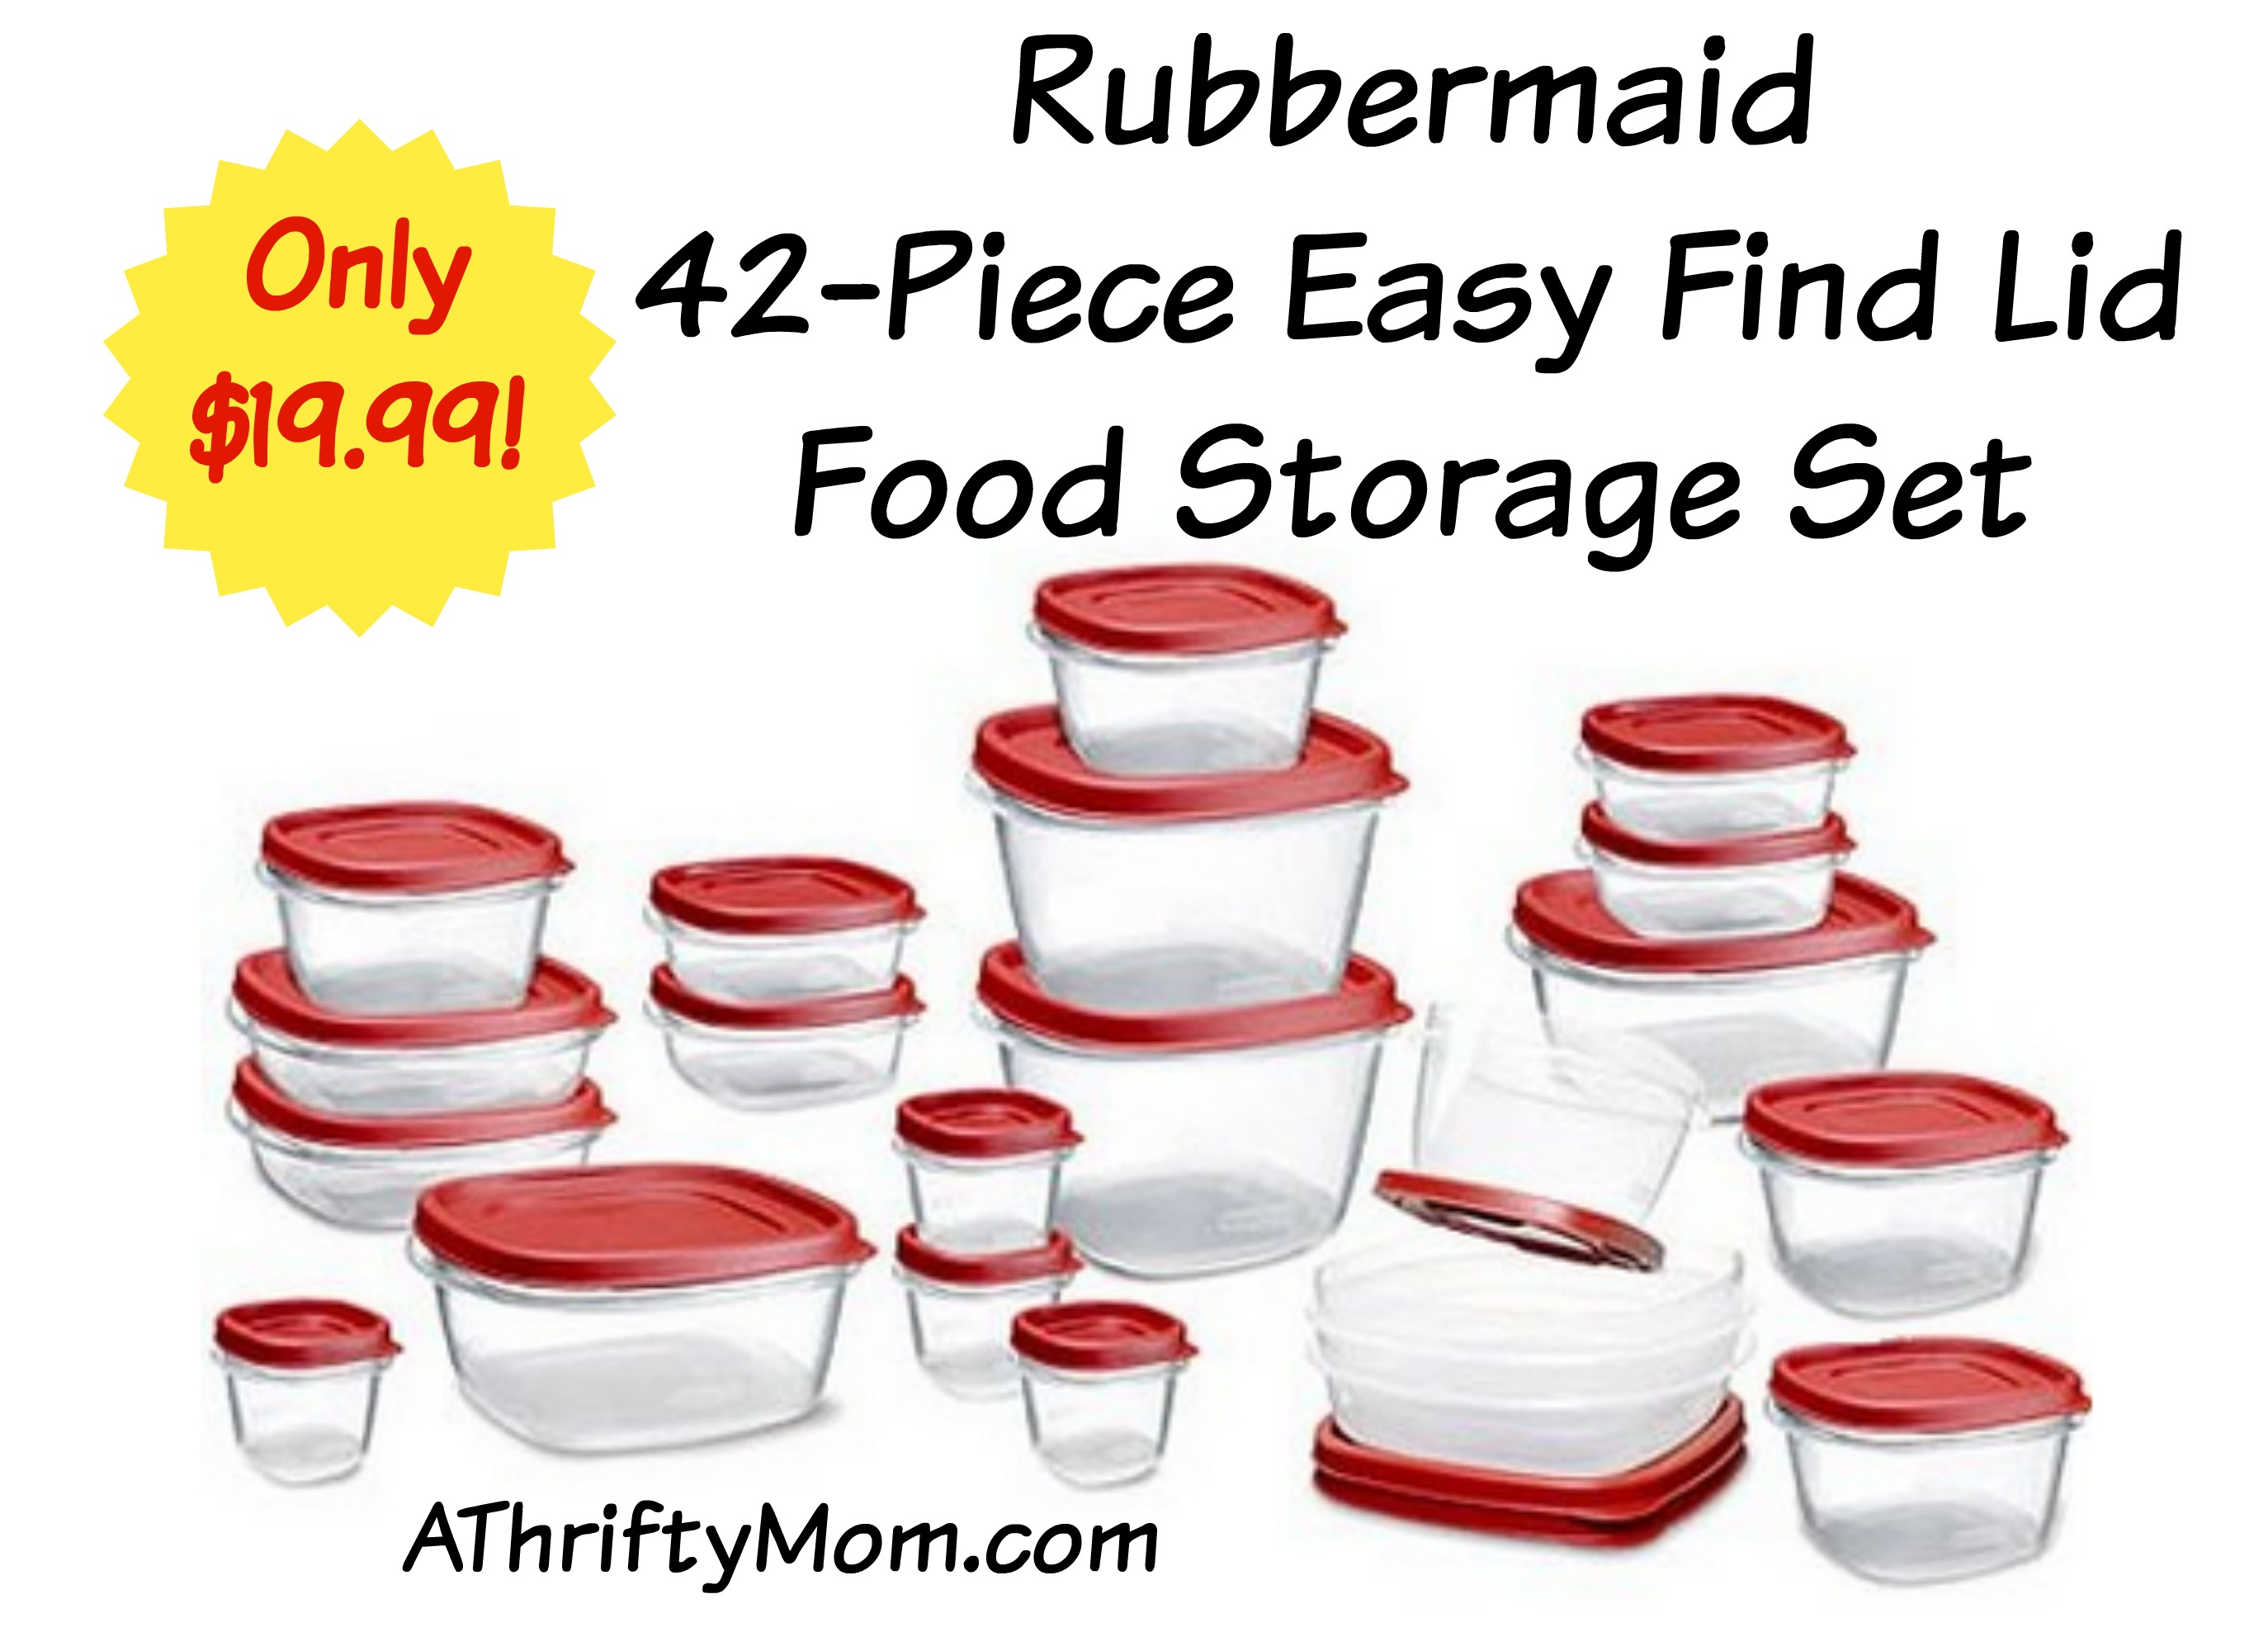 https://athriftymom.com/wp-content/uploads//2014/12/Rubbermaid-42-piece-Easy-Find-Lid-Food-Storage-Set-Just-19.99-Leftovers-KitchenOrganization.jpg